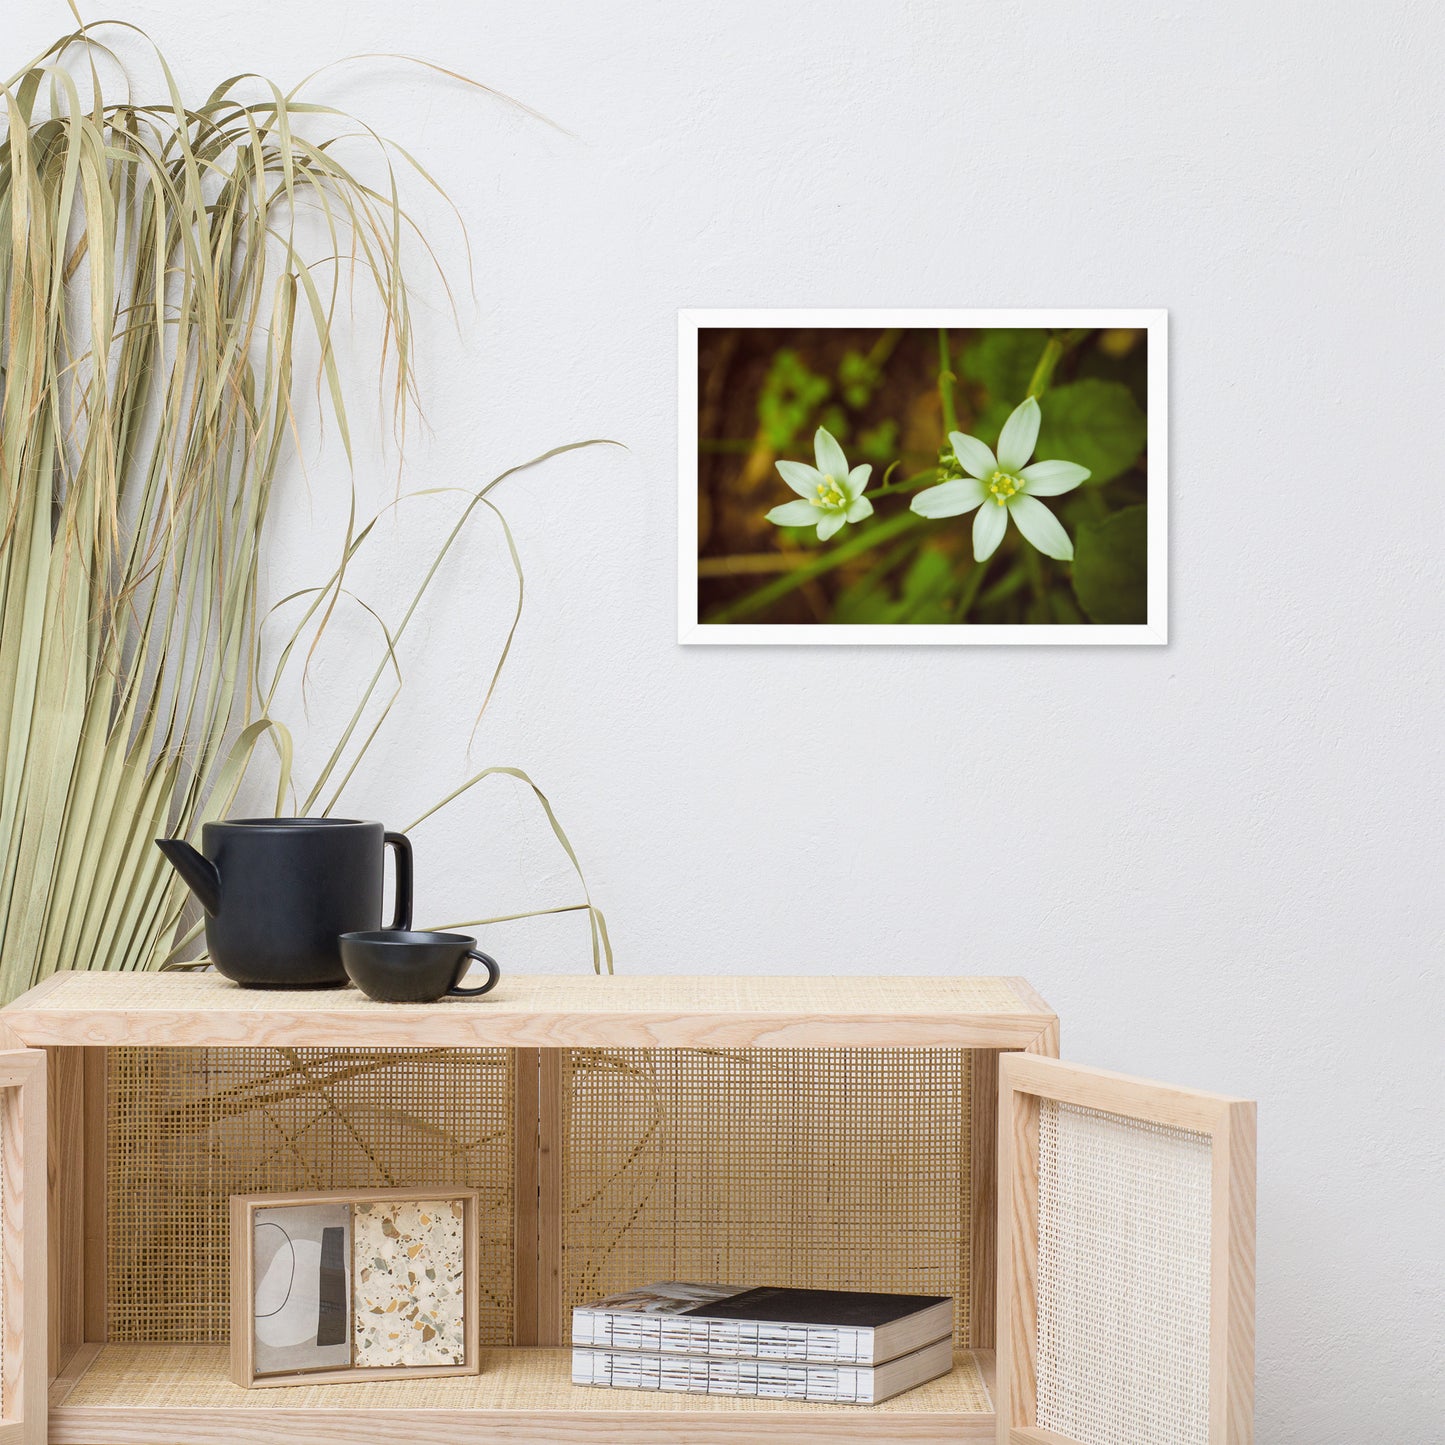 Wild Beauty Floral Nature Photo Framed Wall Art Print